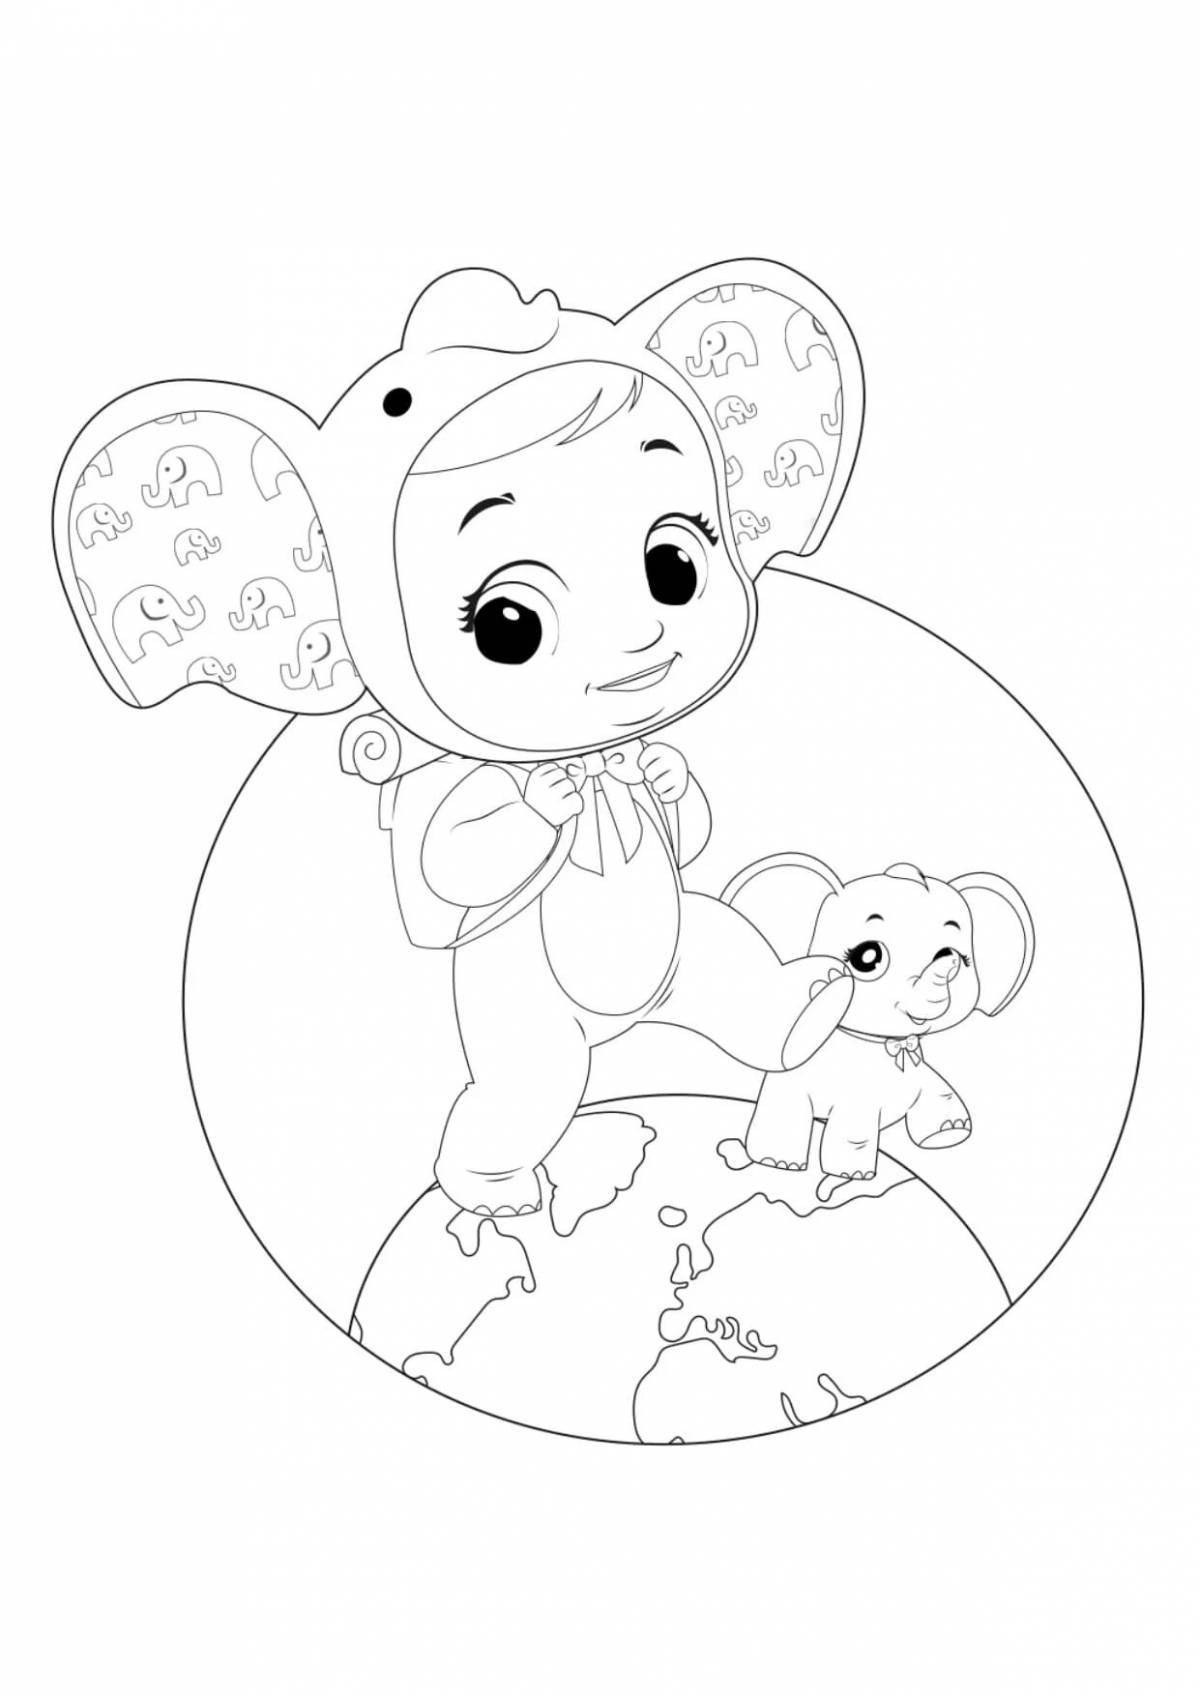 Crybaby sunshine coloring page